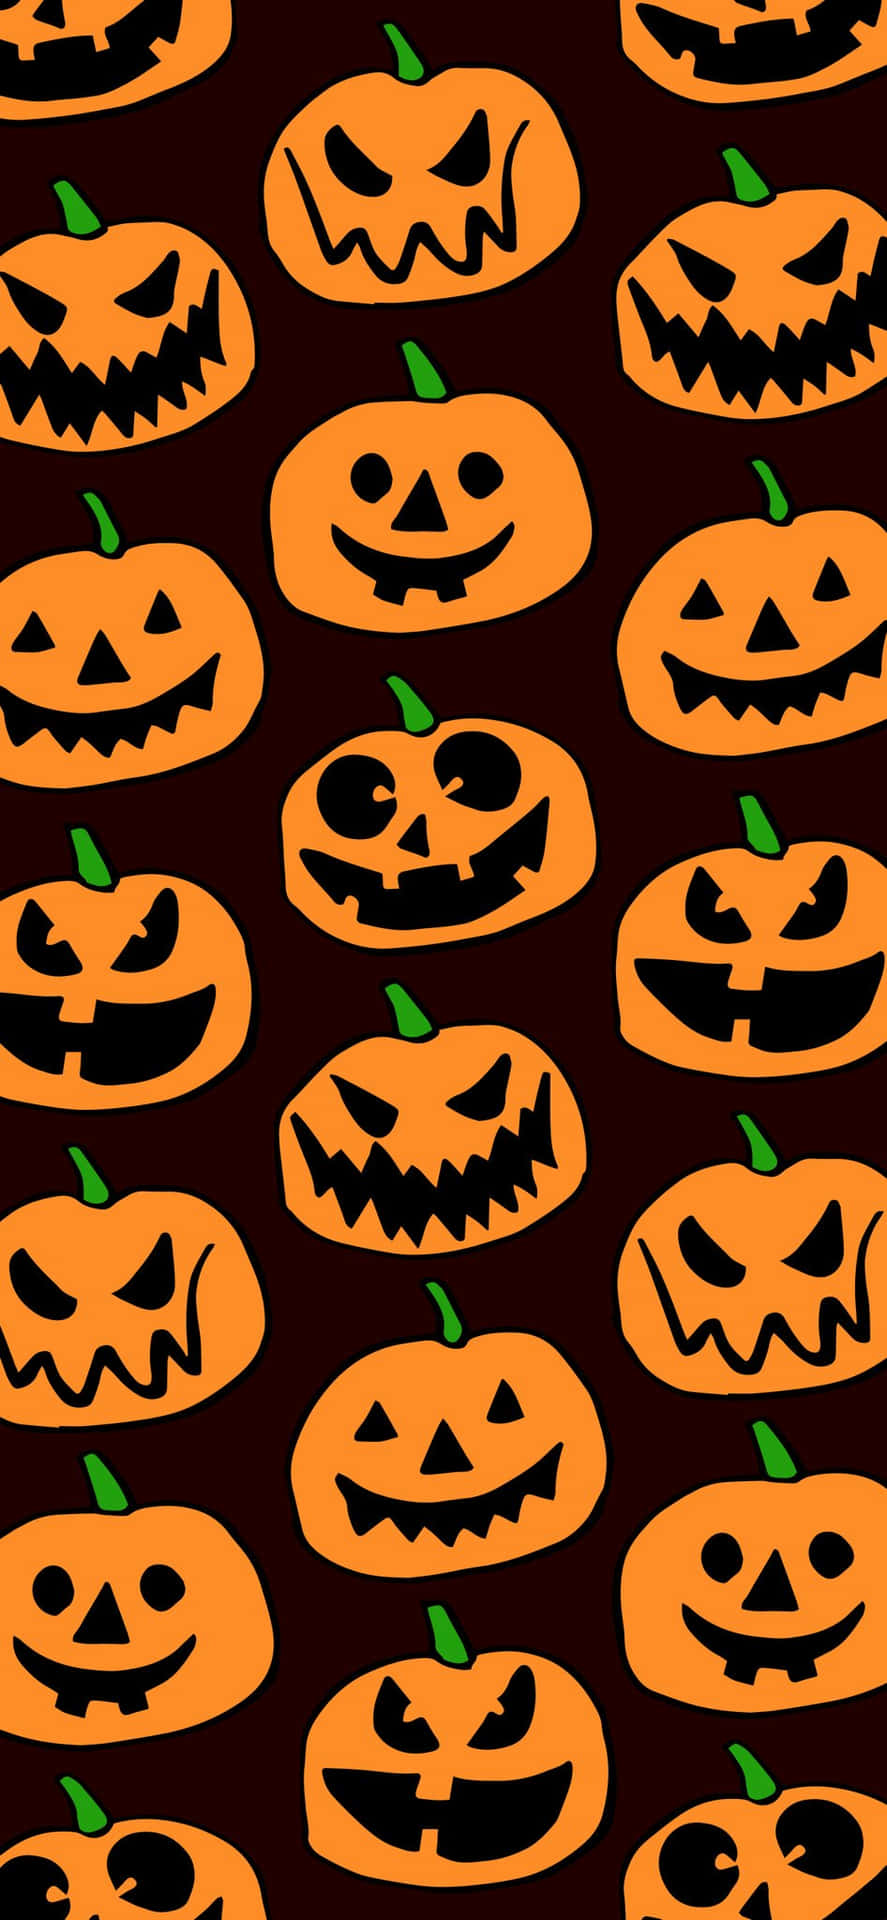 Get into the Halloween Spirit with this Fun Phone Background